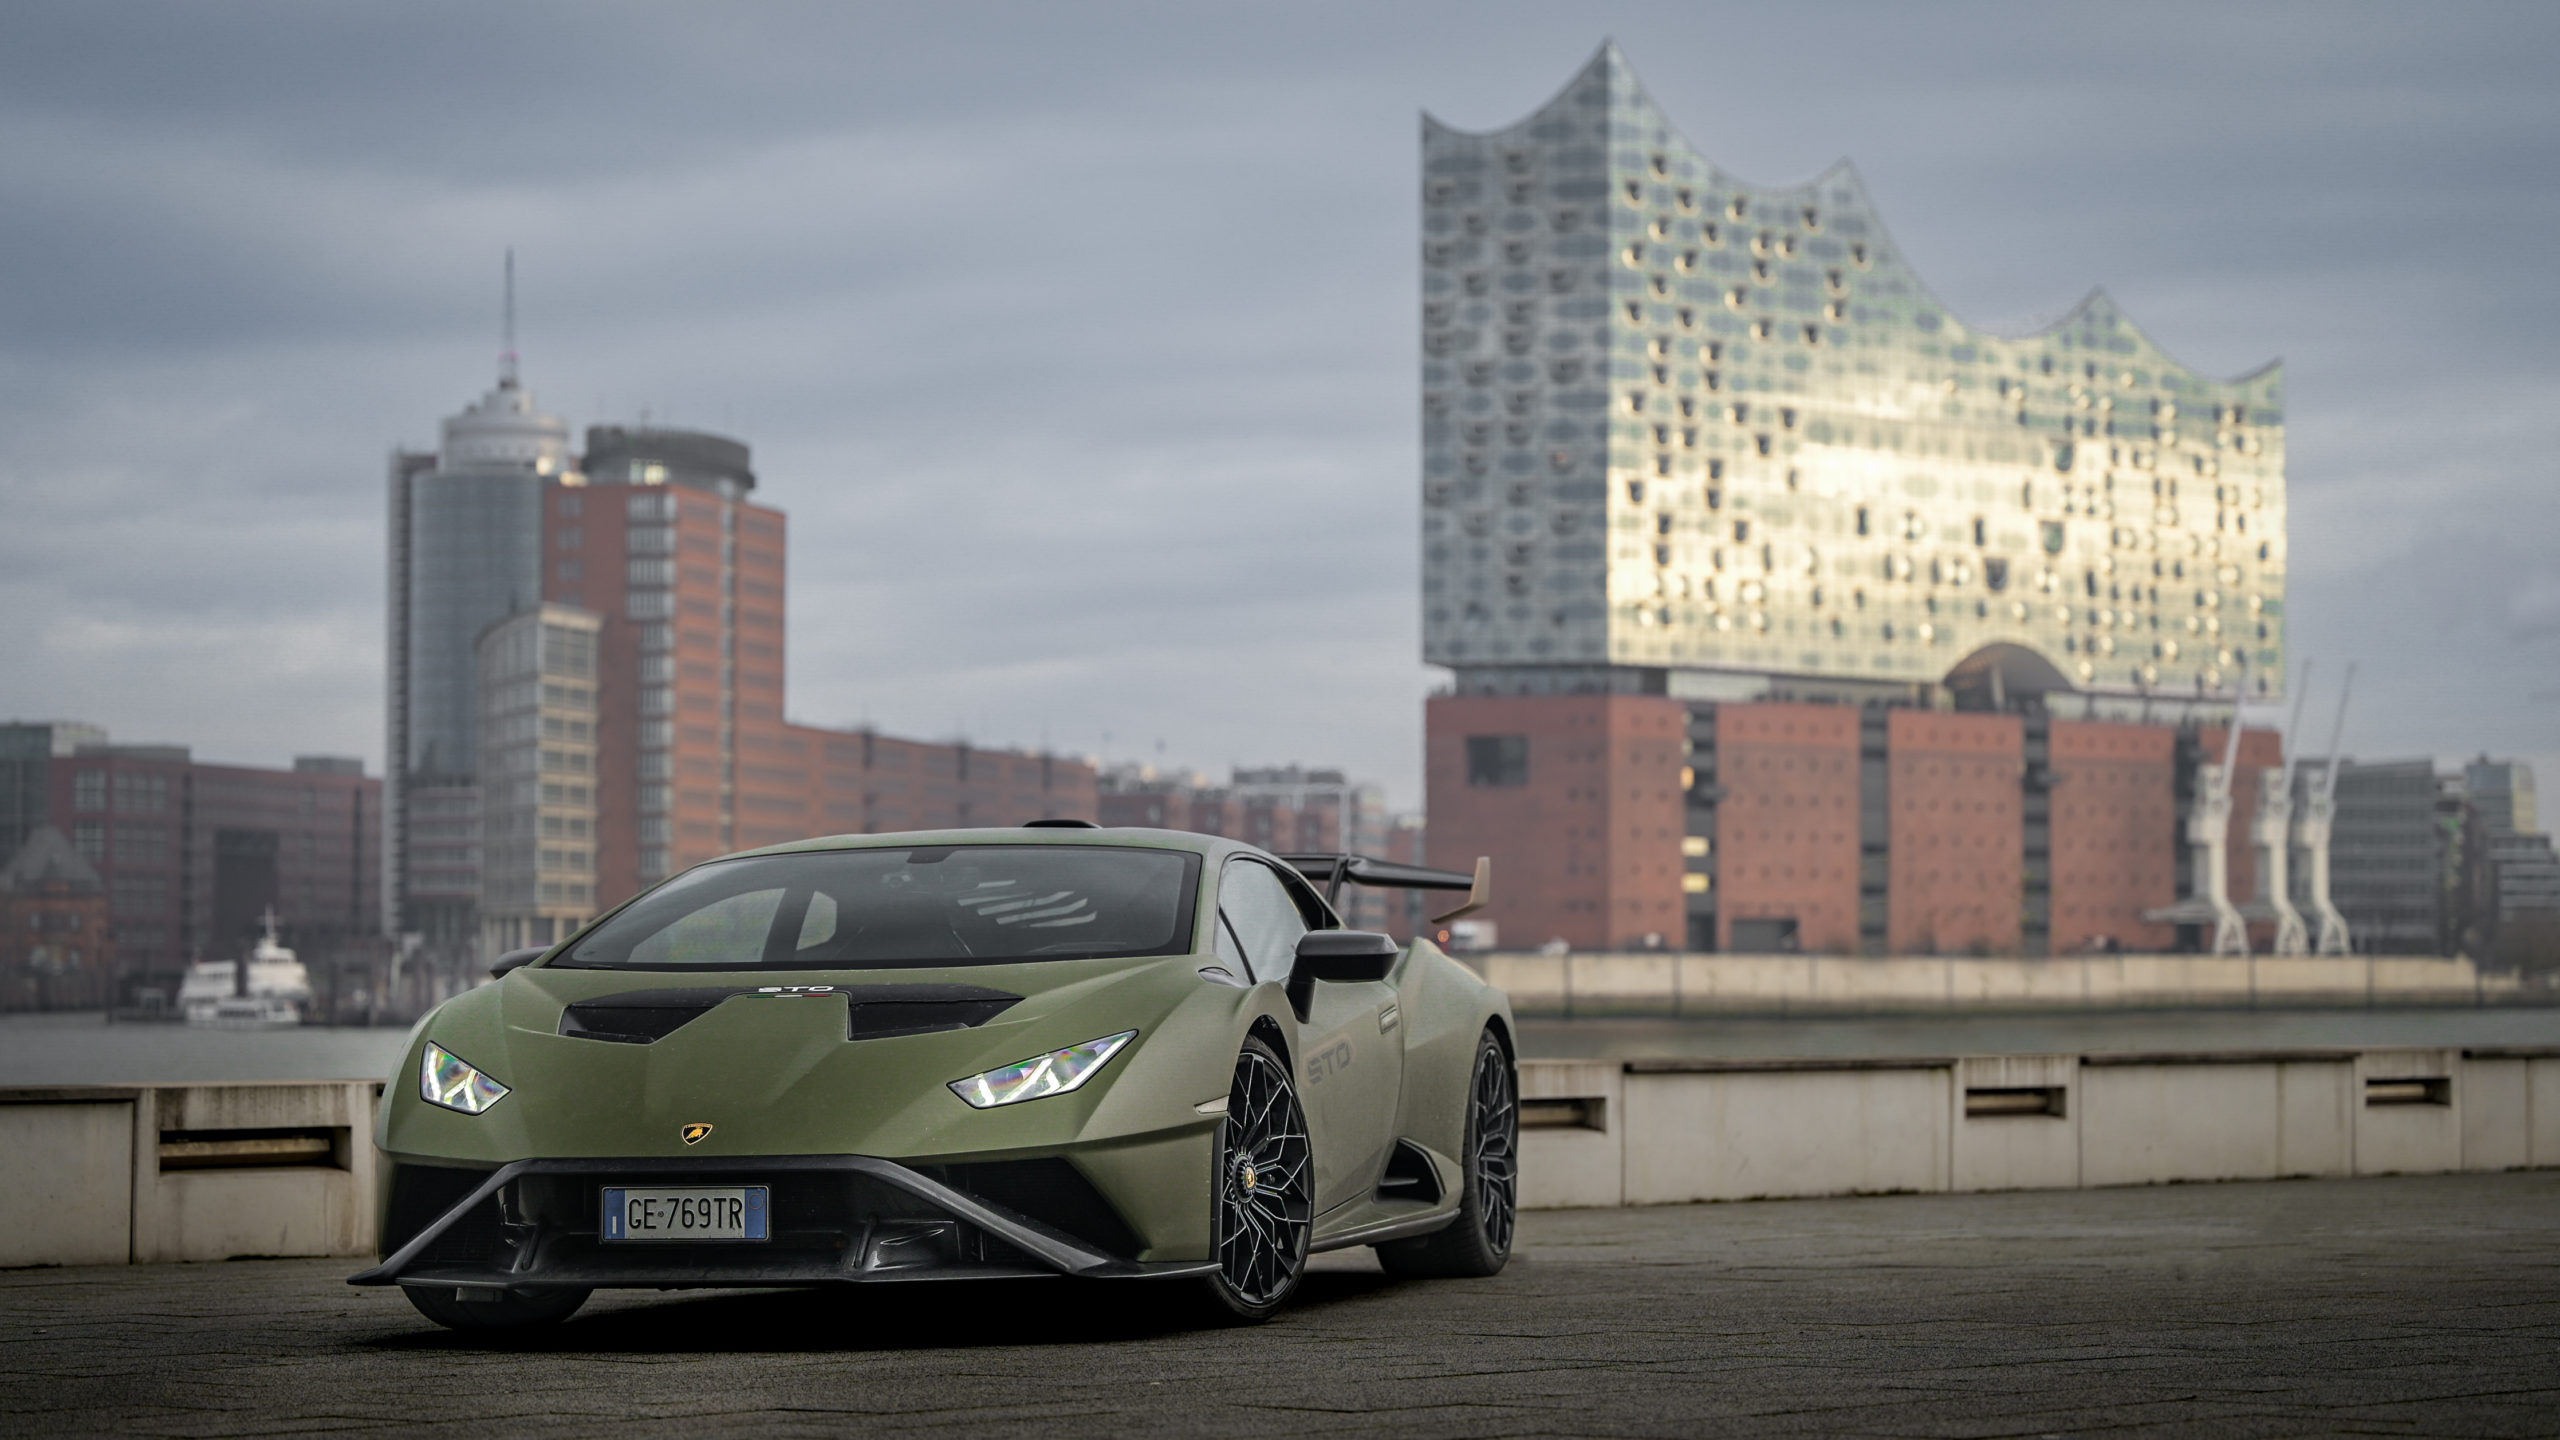 Lamborghini Huracan, Sports Touring (STO), Business Insider review, Exciting drive, 2560x1440 HD Desktop